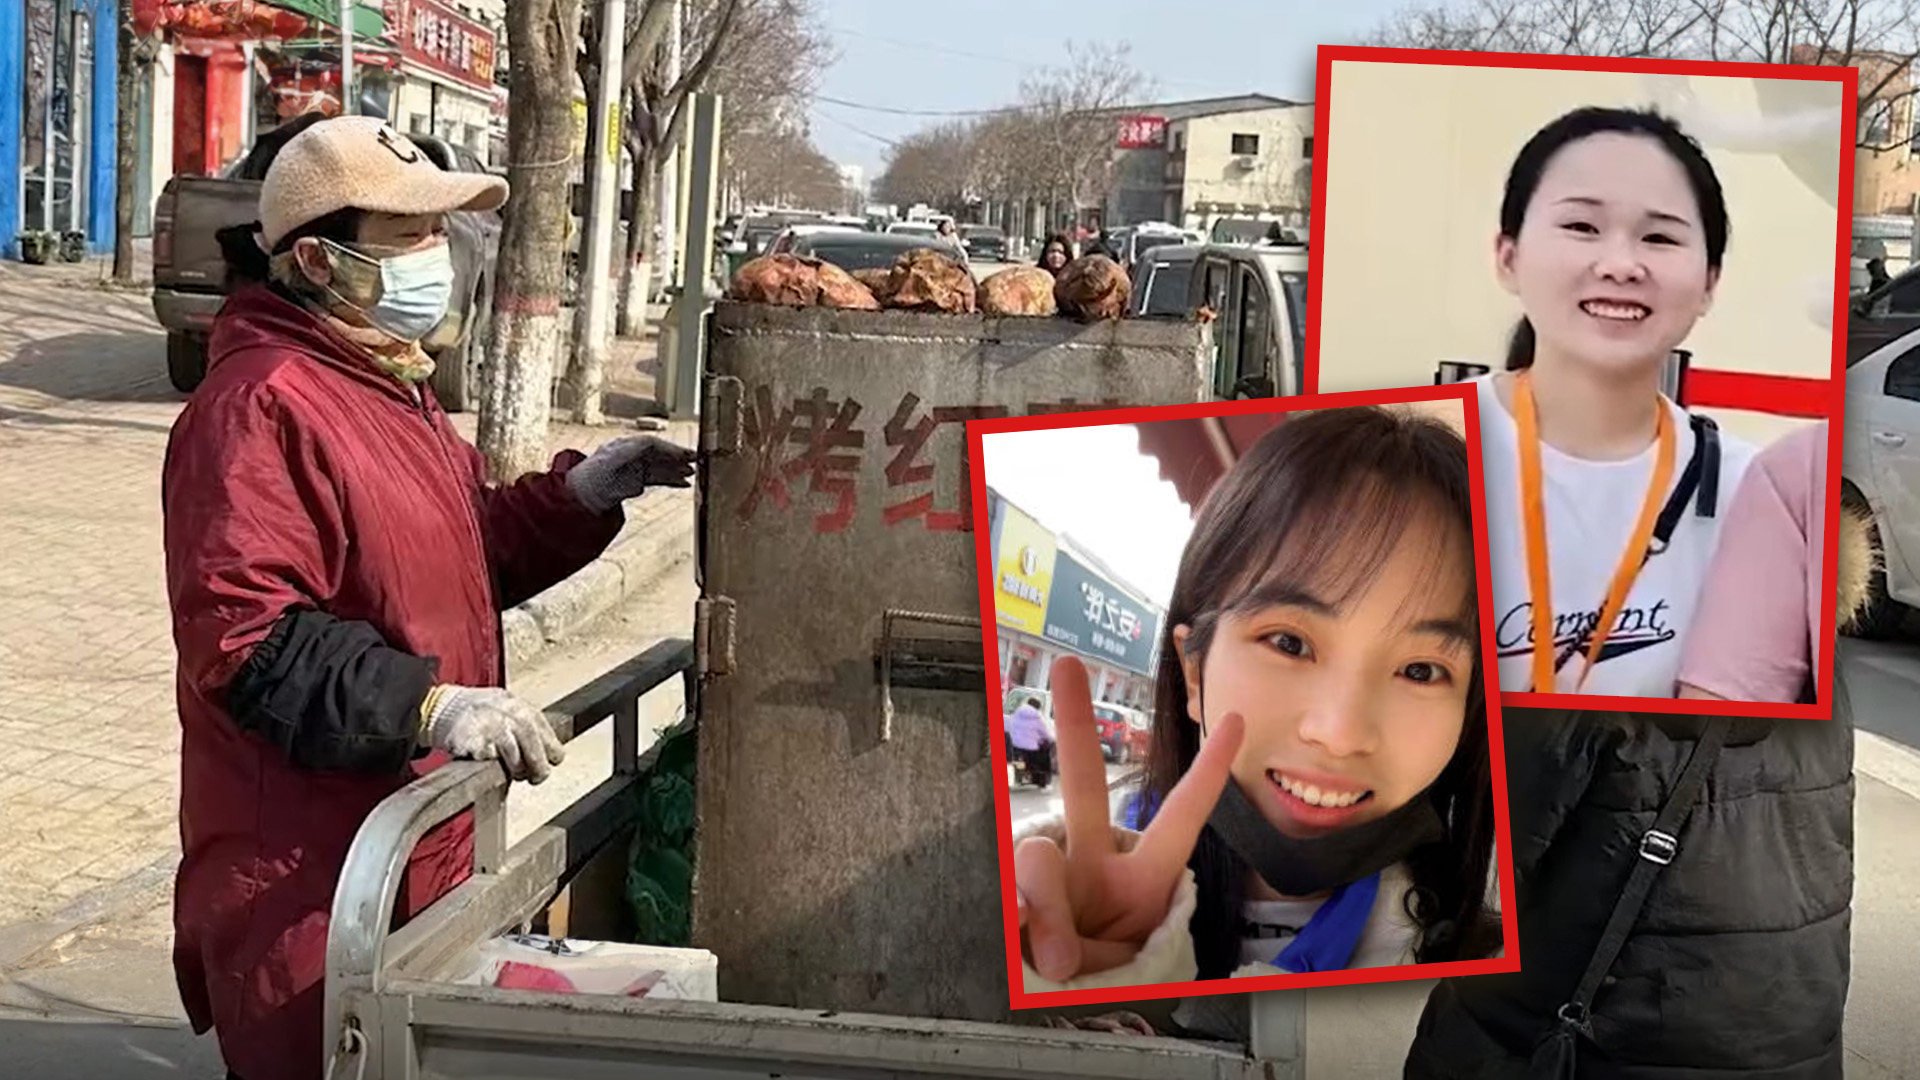 A mother in rural China who made many sacrifices so that her two daughters could excel academically has earned widespread praise on mainland social media. Photo: SCMP composite/Weibo